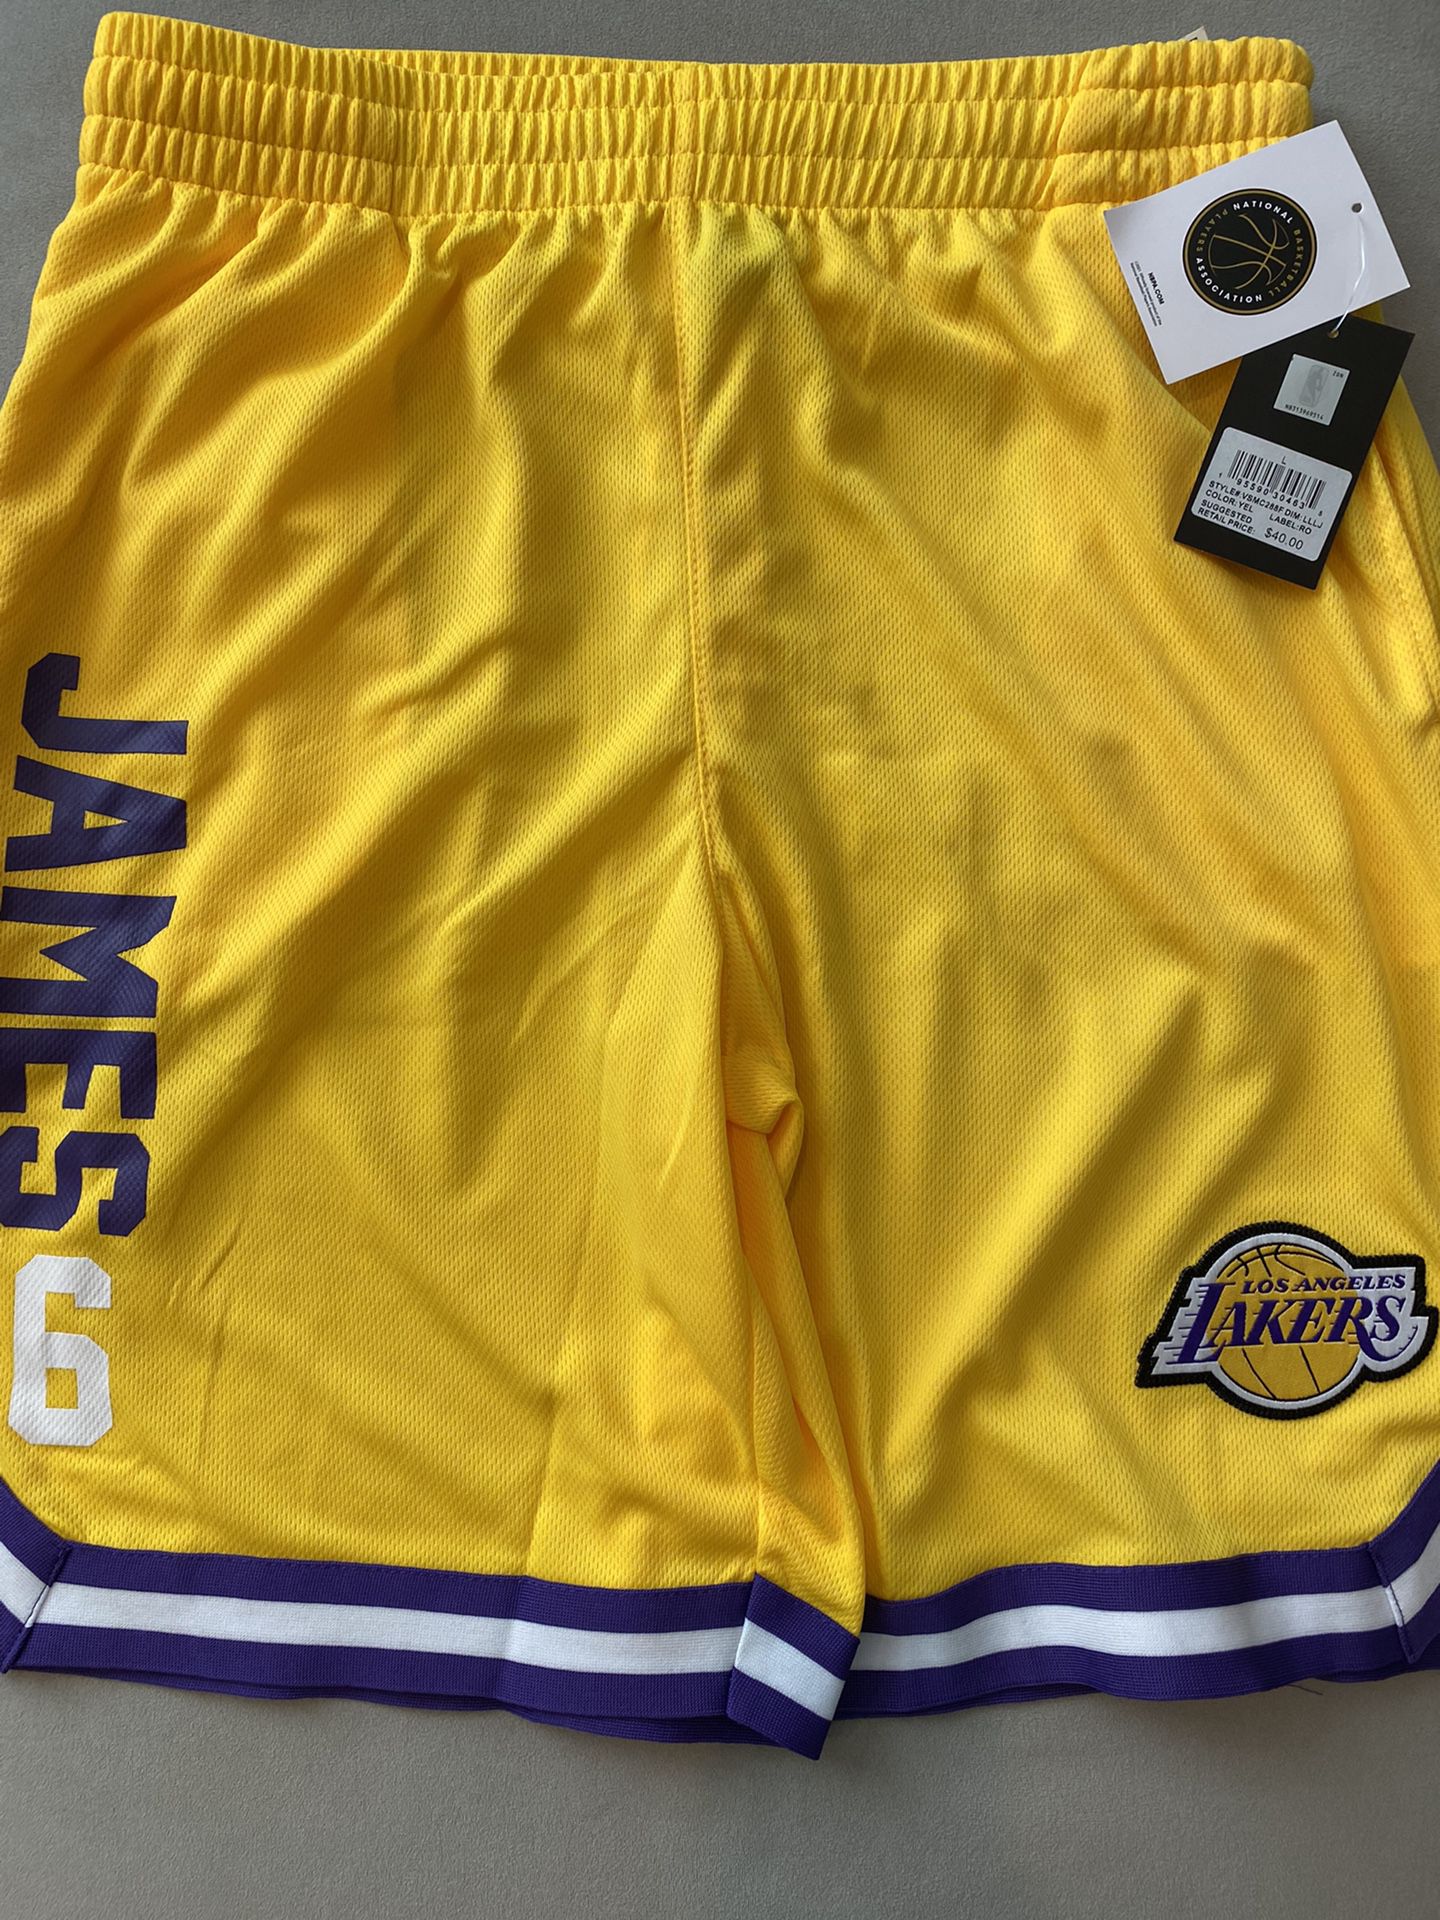 NBA Los Angeles Lakers Lebron James Shorts for Sale in Irwindale